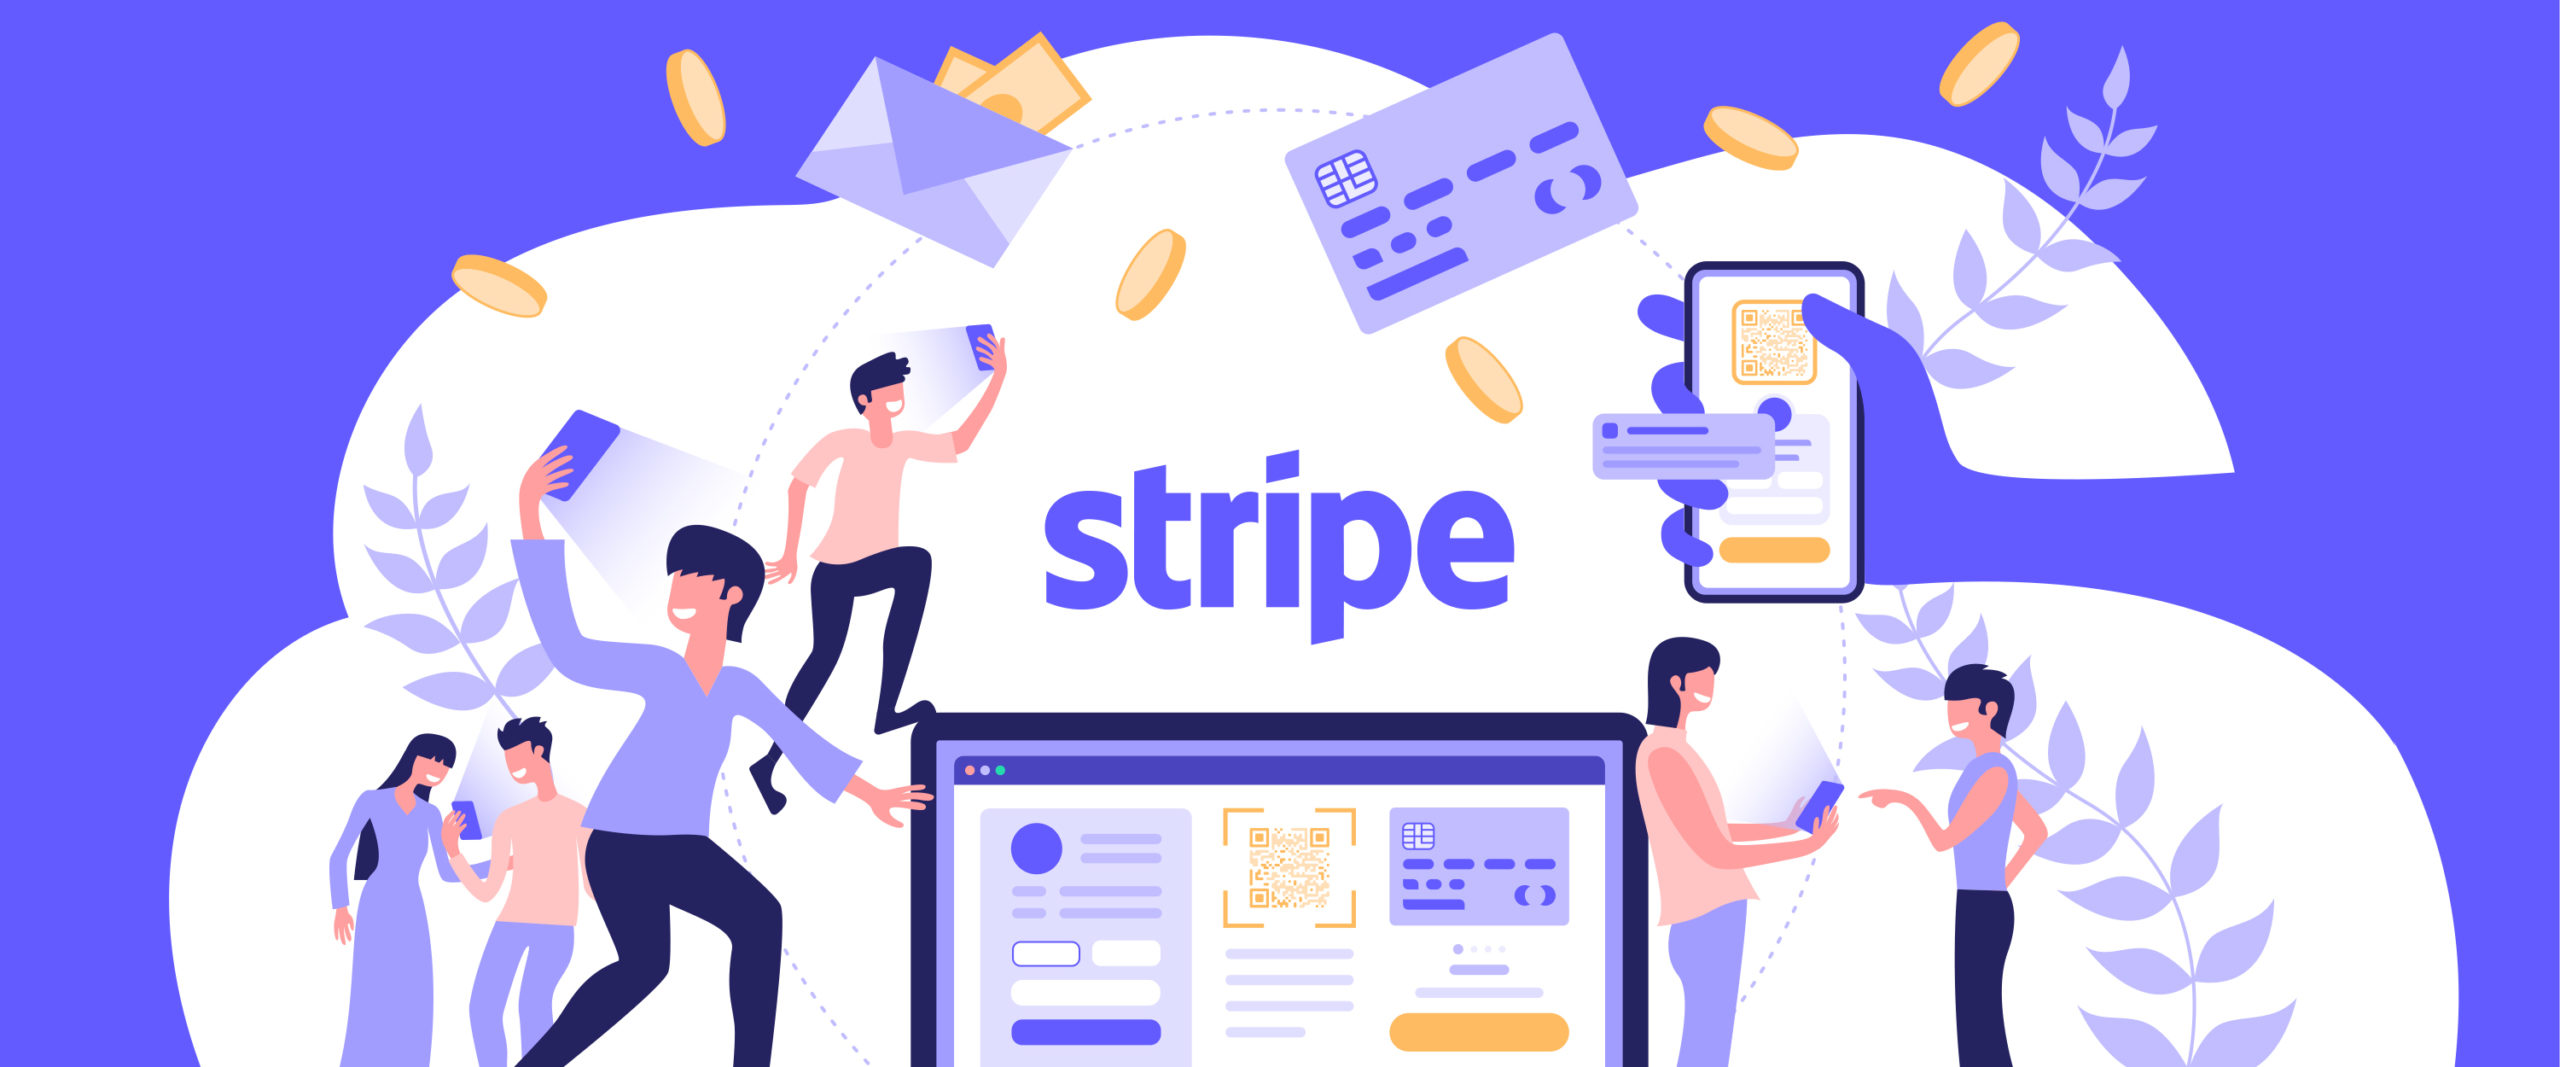 Why stripe popular blog scaled 1 | aio création